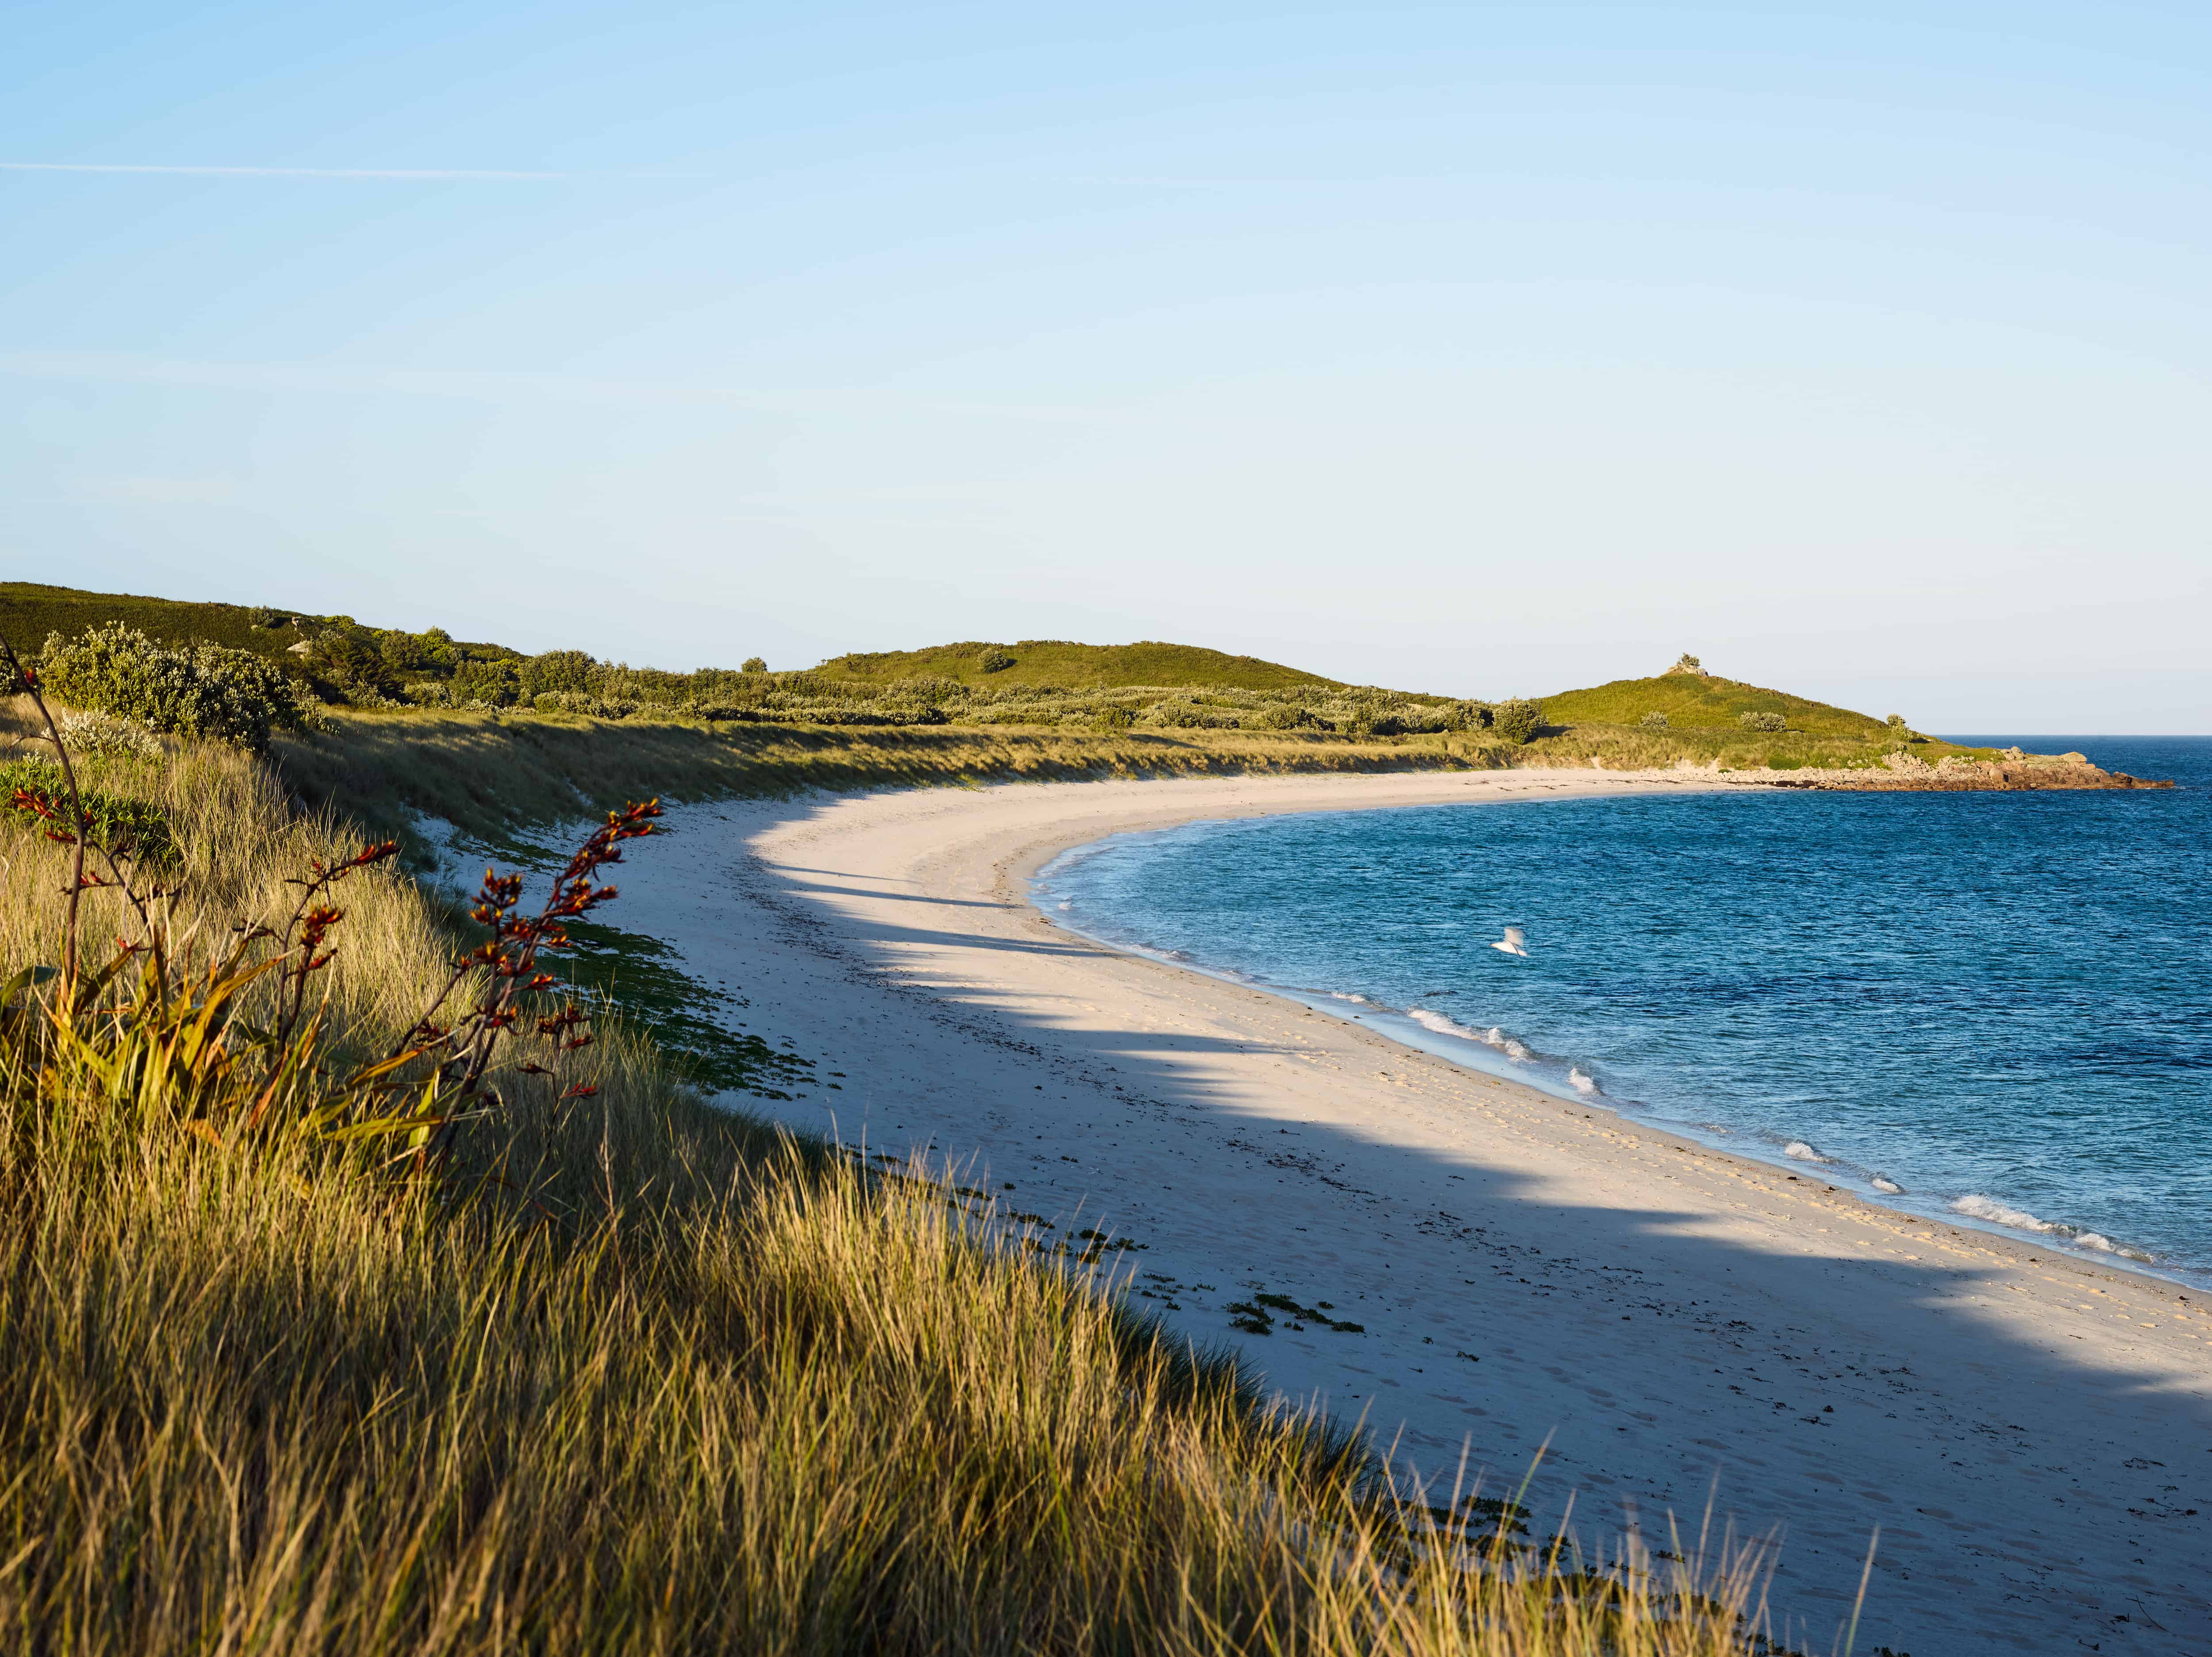 visit isles of scilly .com